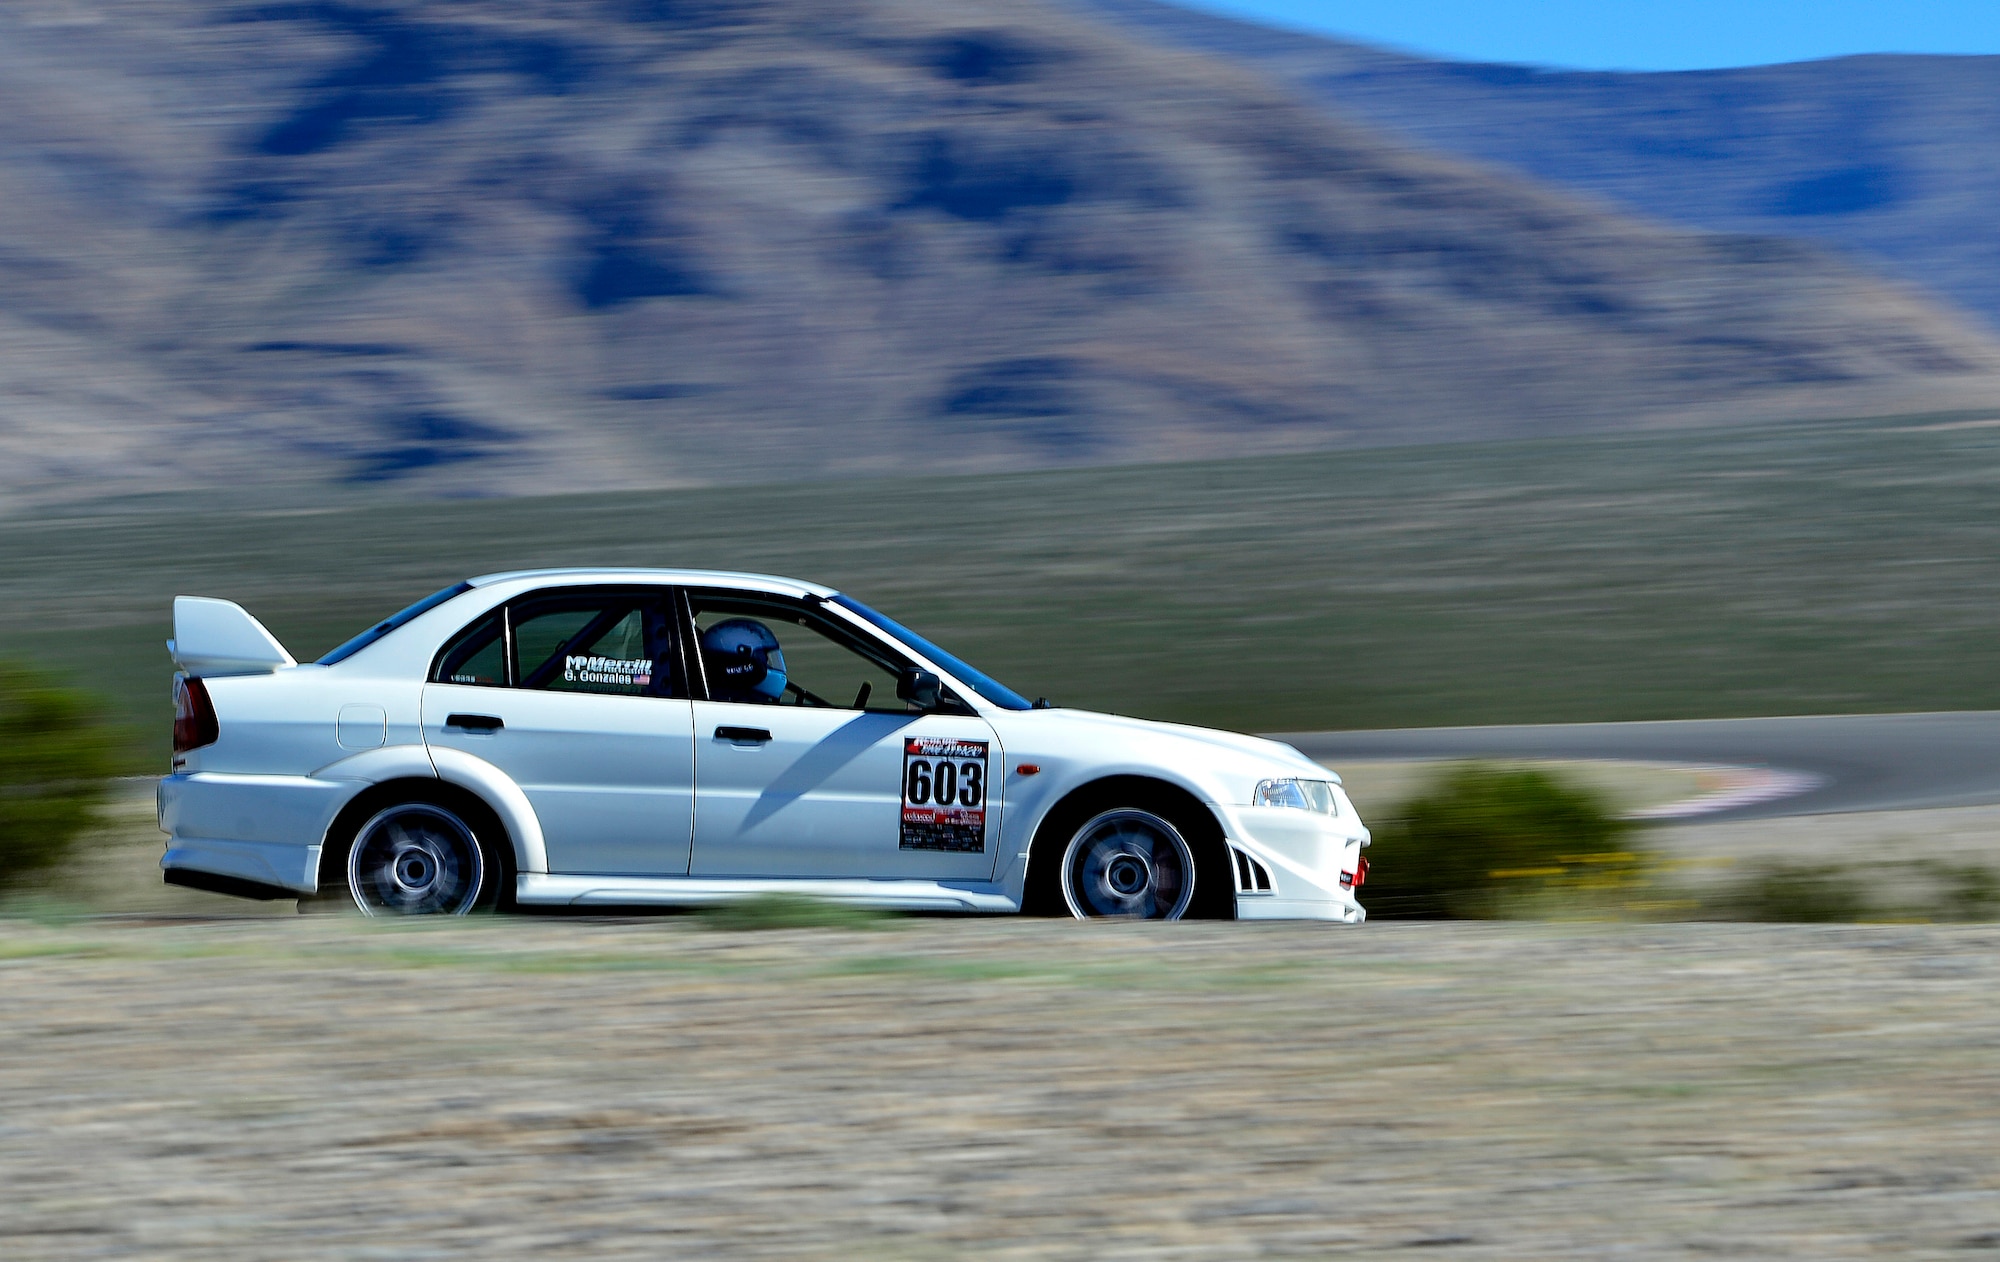 Tech. Sgt. Gabriel, 432nd Wing/432nd Air Expeditionary Wing MQ-9 Reaper sensor operator, races his Mitsubishi Lancer Evolution at the Spring Mountain Raceway Nov. 1, 2015, in Pahrump, Nevada. Gabriel has owned and modified his Evolution for over five years. He's upgraded everything from the engine, suspension, brakes, and safety equipment to compete in time attack style racing. (U.S. Air Force photo by Airman 1st Class Christian Clausen/Released)